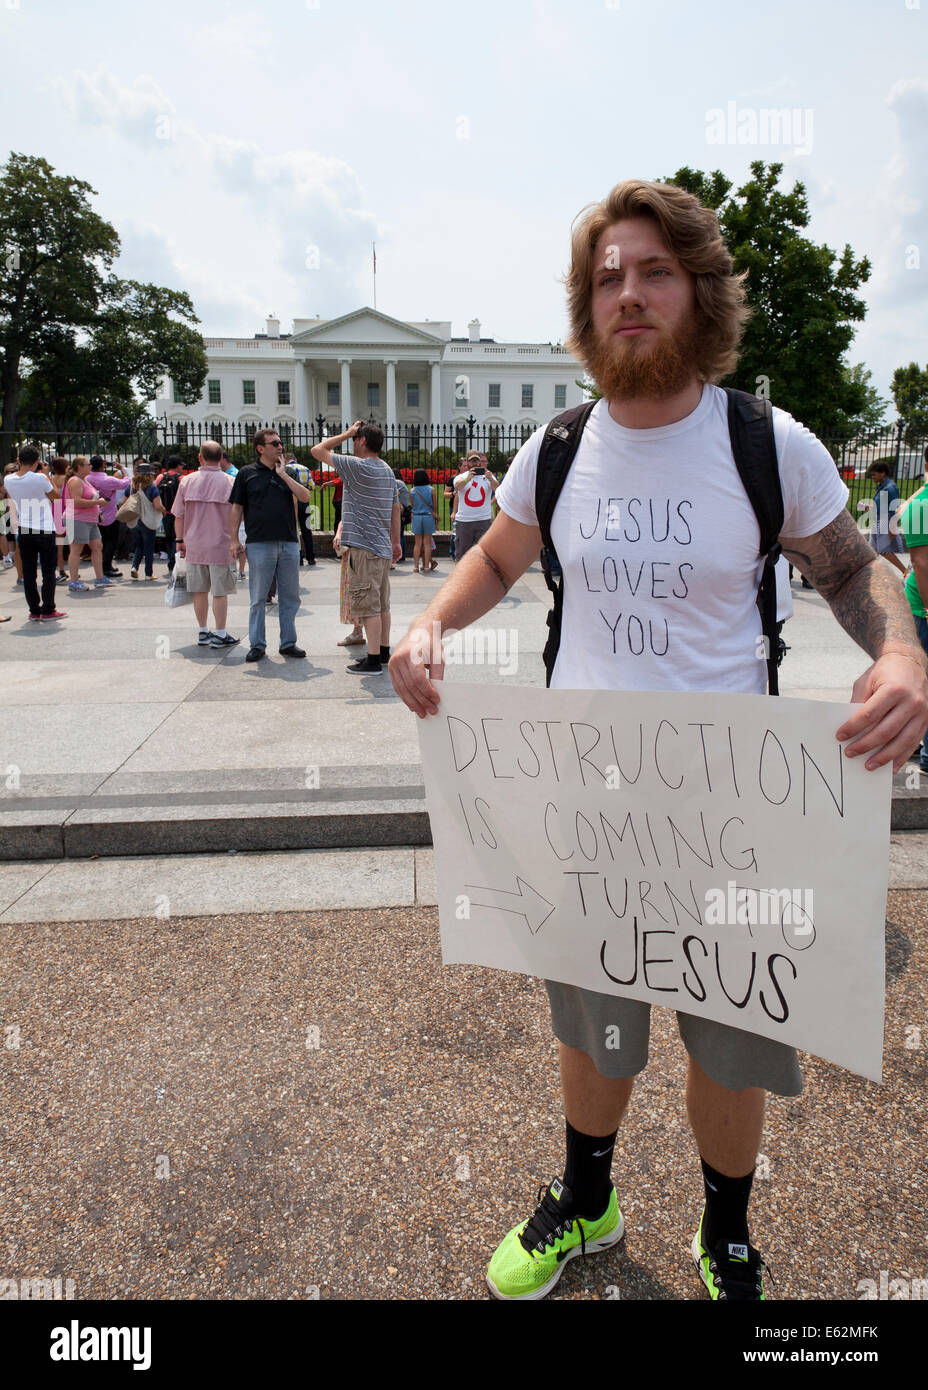 Man holding Christian message sign in front of the White House - Washington, DC USA Stock Photo